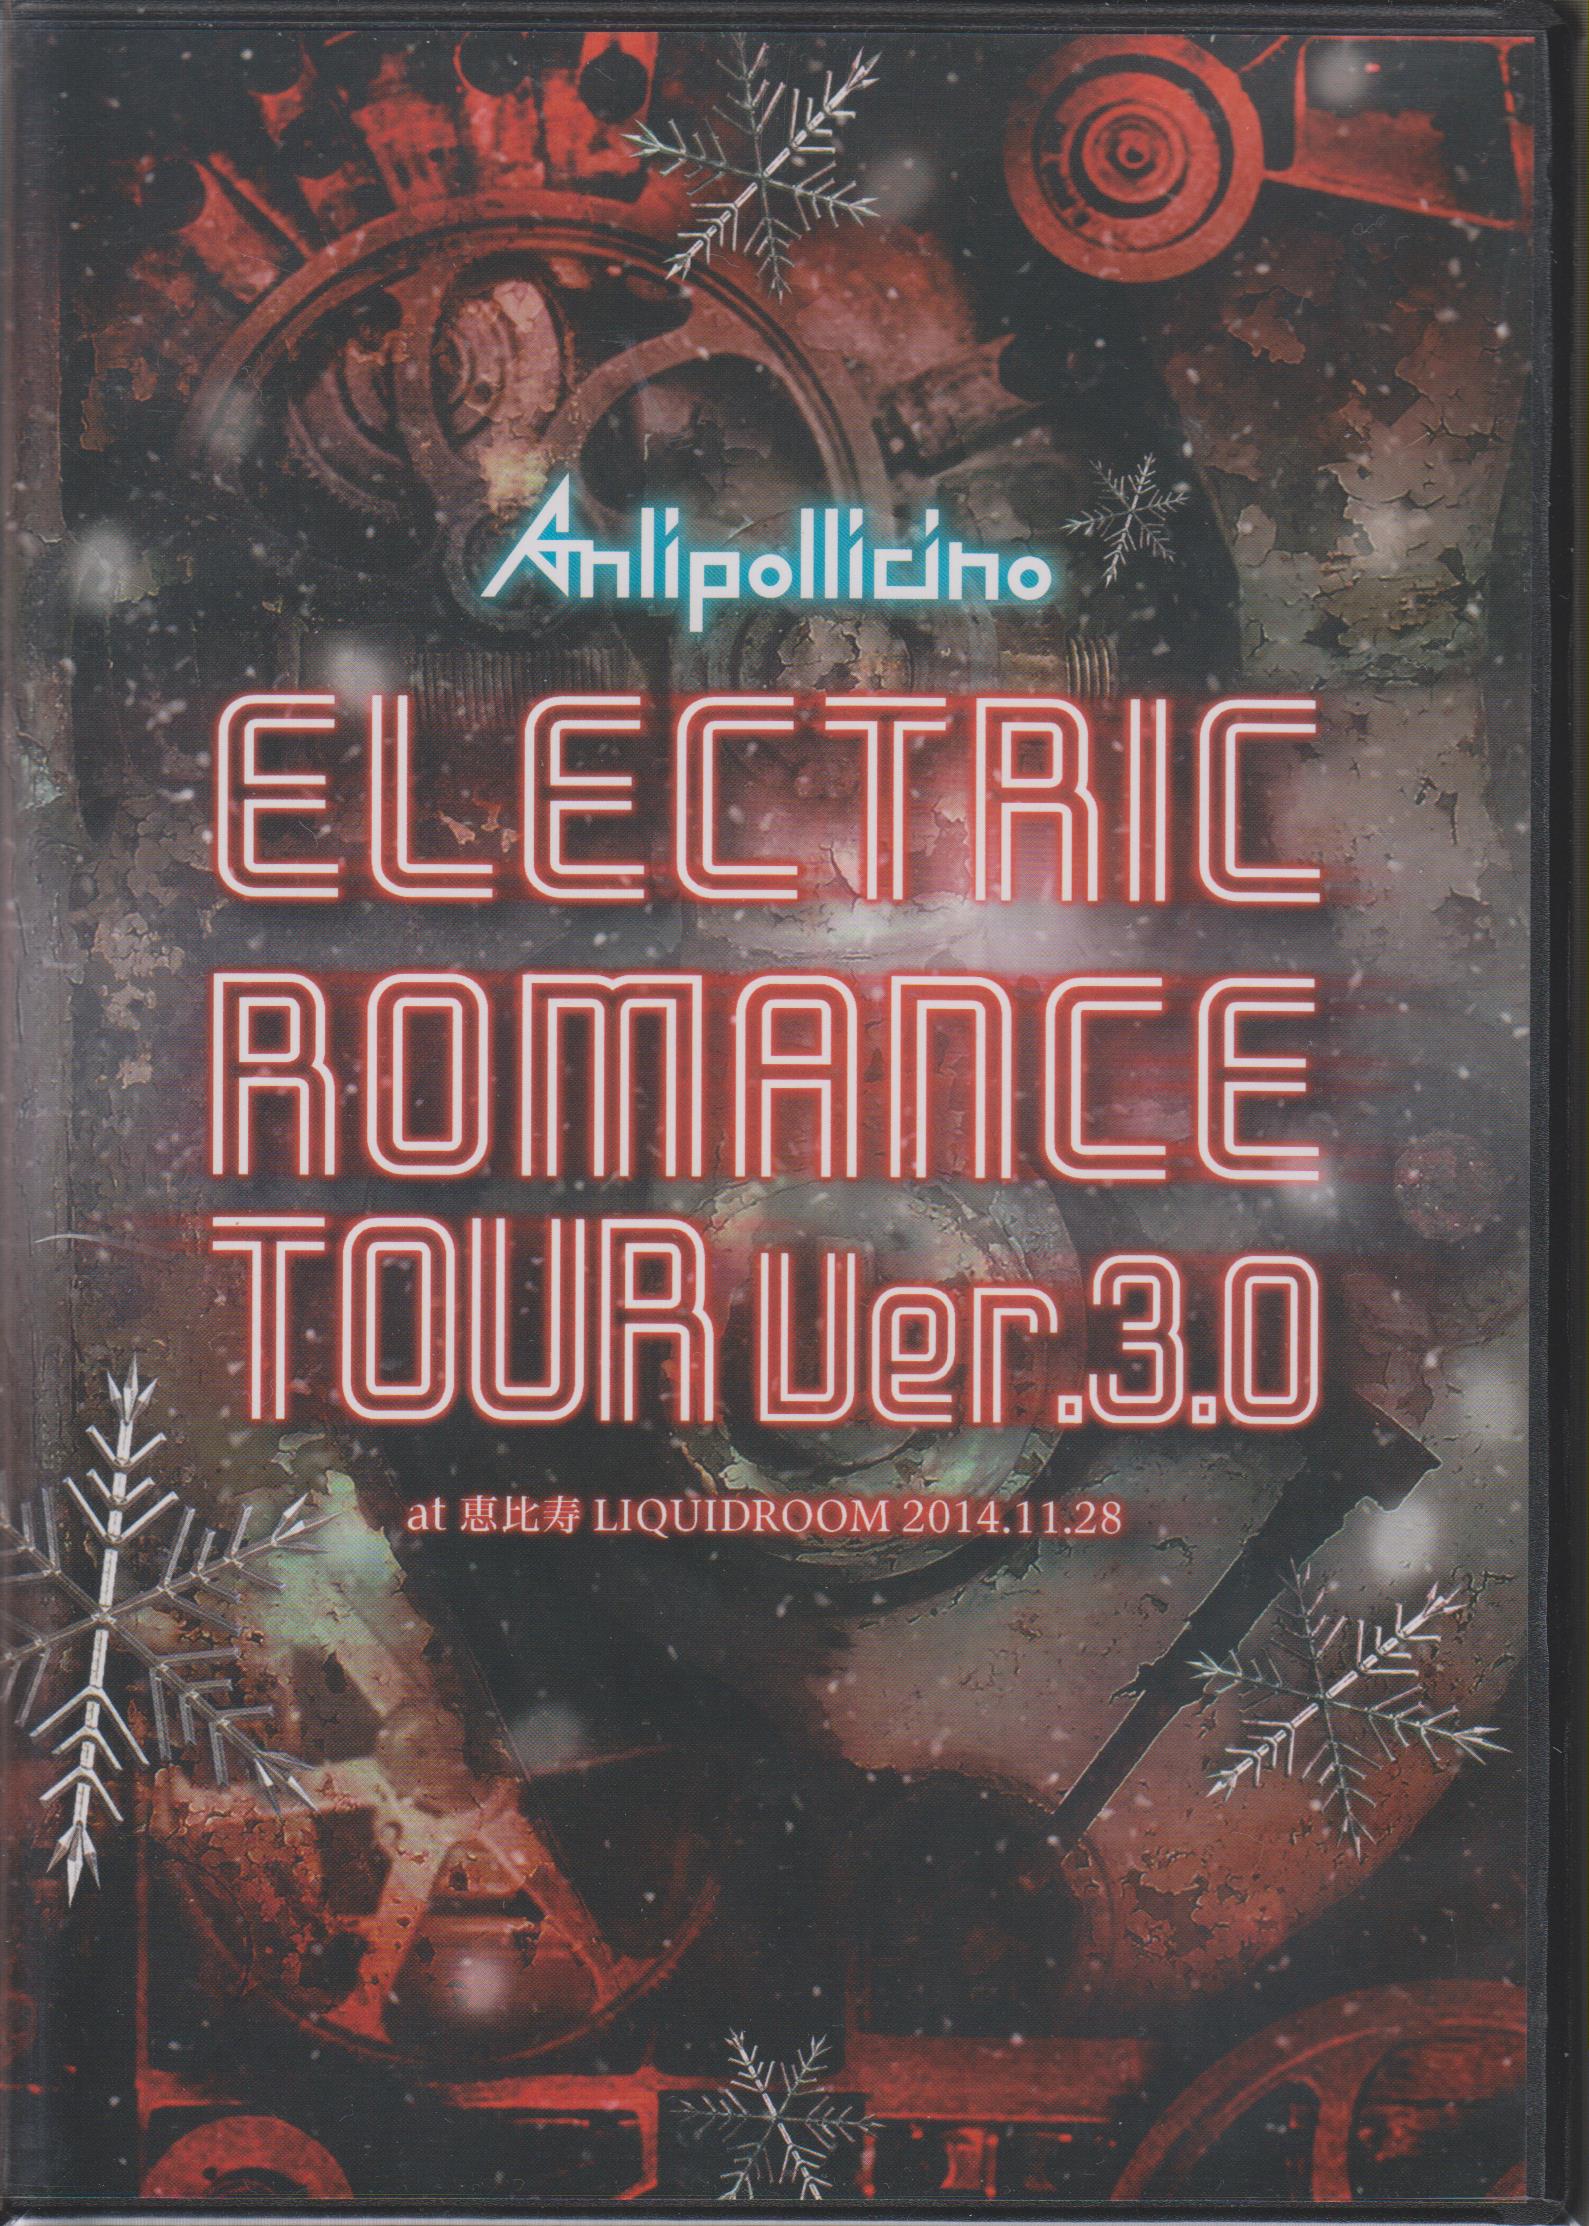 Anli Pollicino ( アンリポリチーノ )  の DVD ELECTRIC ROMANCE TOUR Ver.3.0 at 恵比寿 LIQUIDROOM 2014.11.28